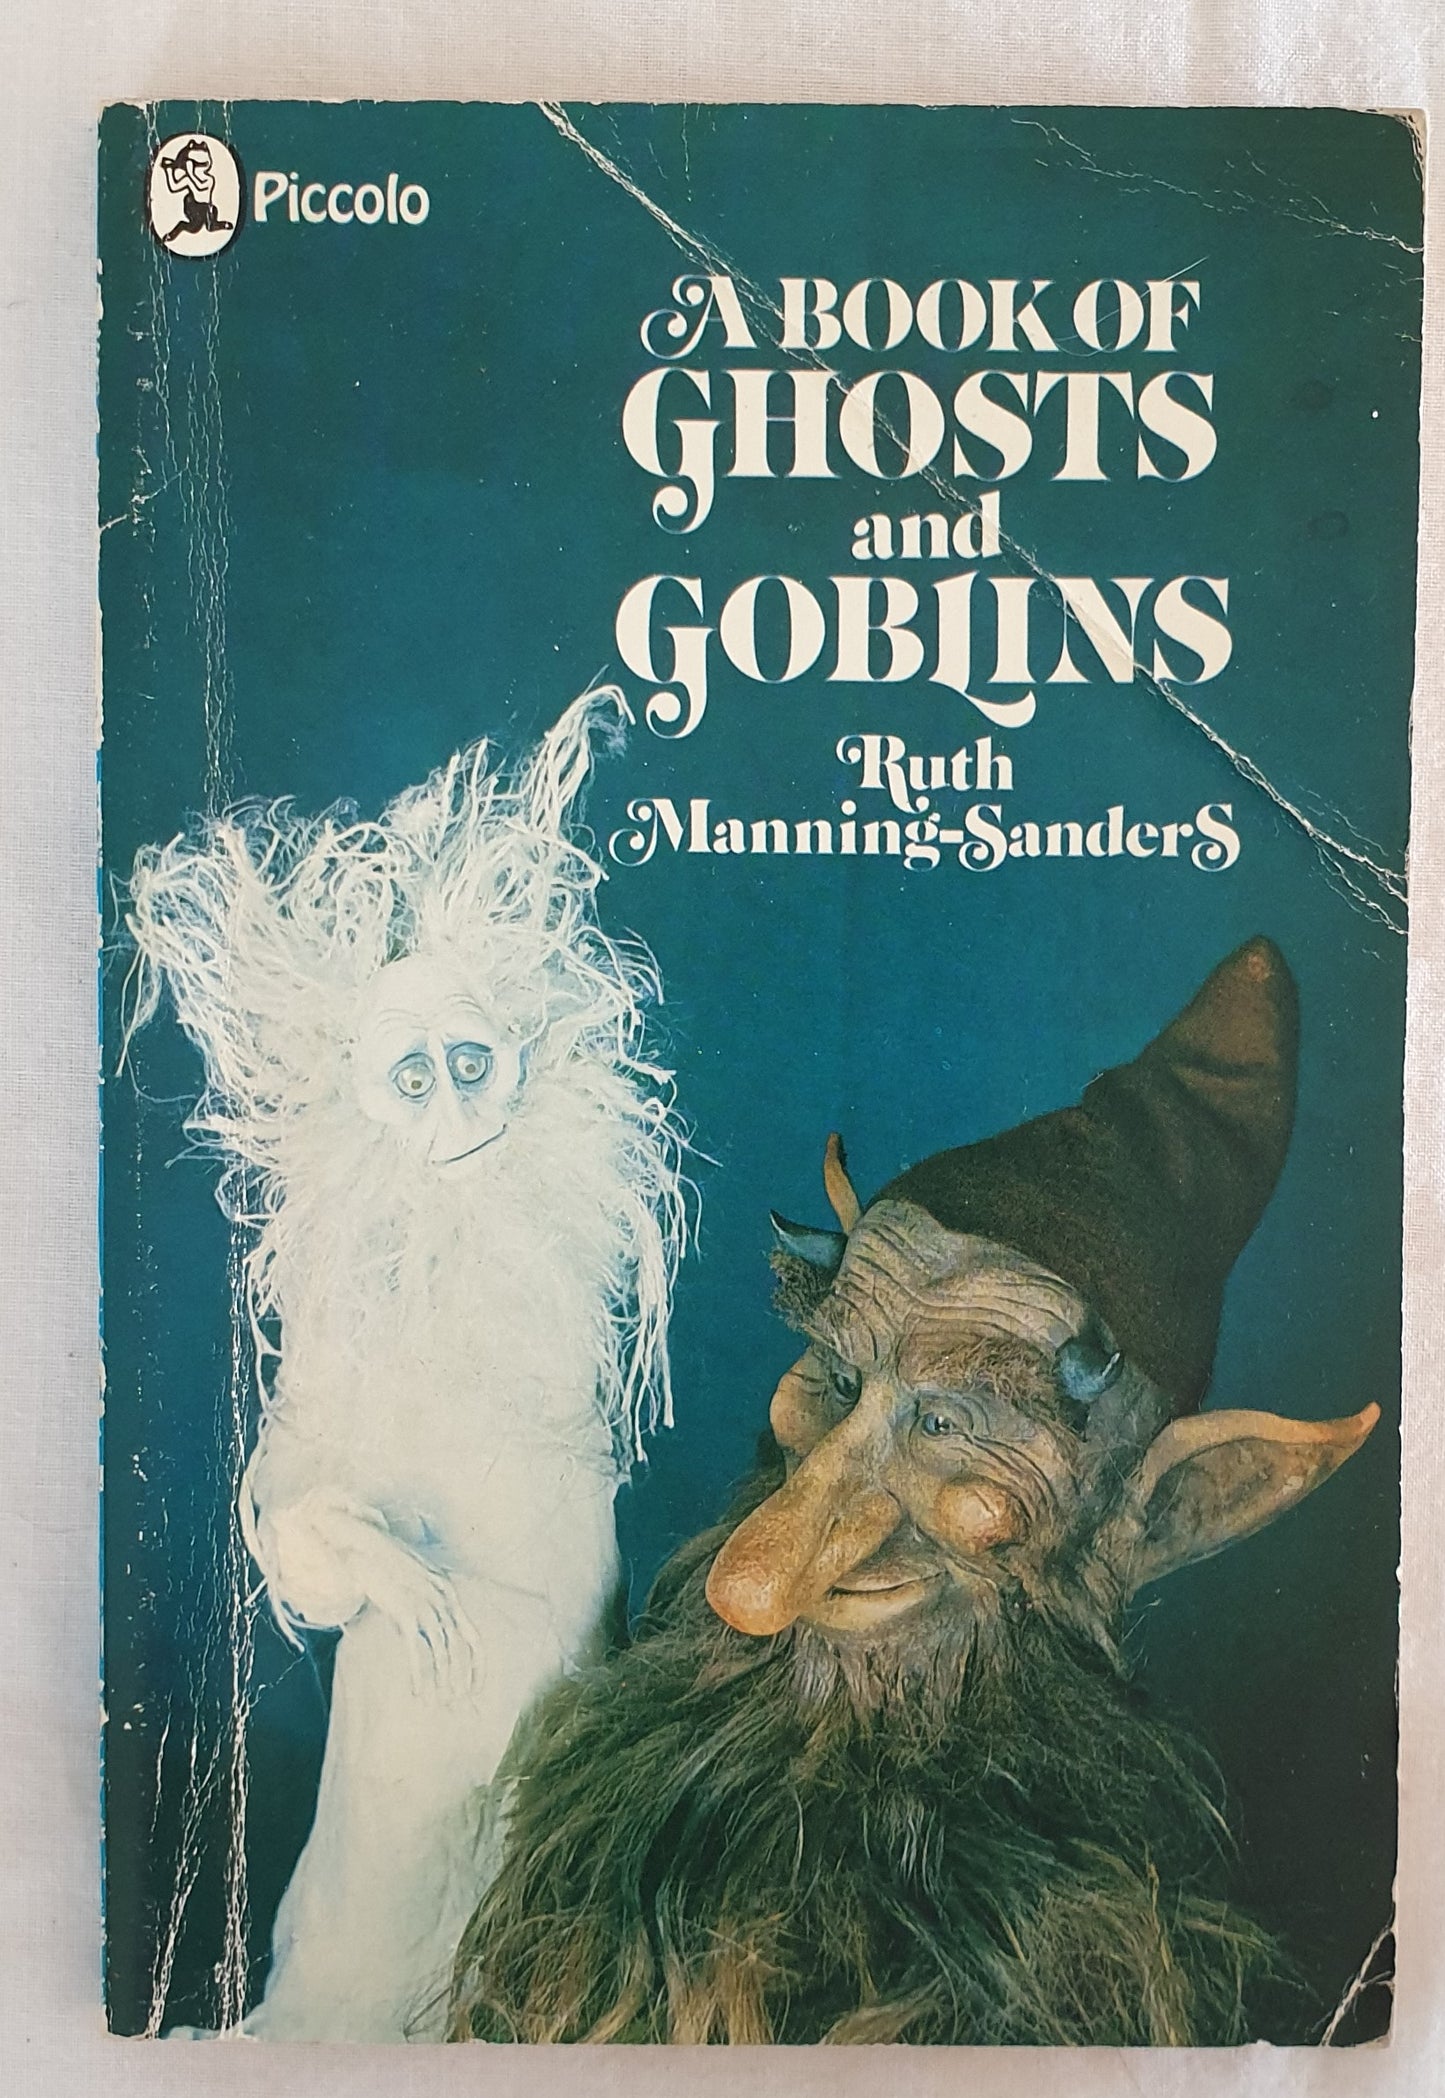 A Book of Ghosts and Goblins  by Ruth Manning-Sanders